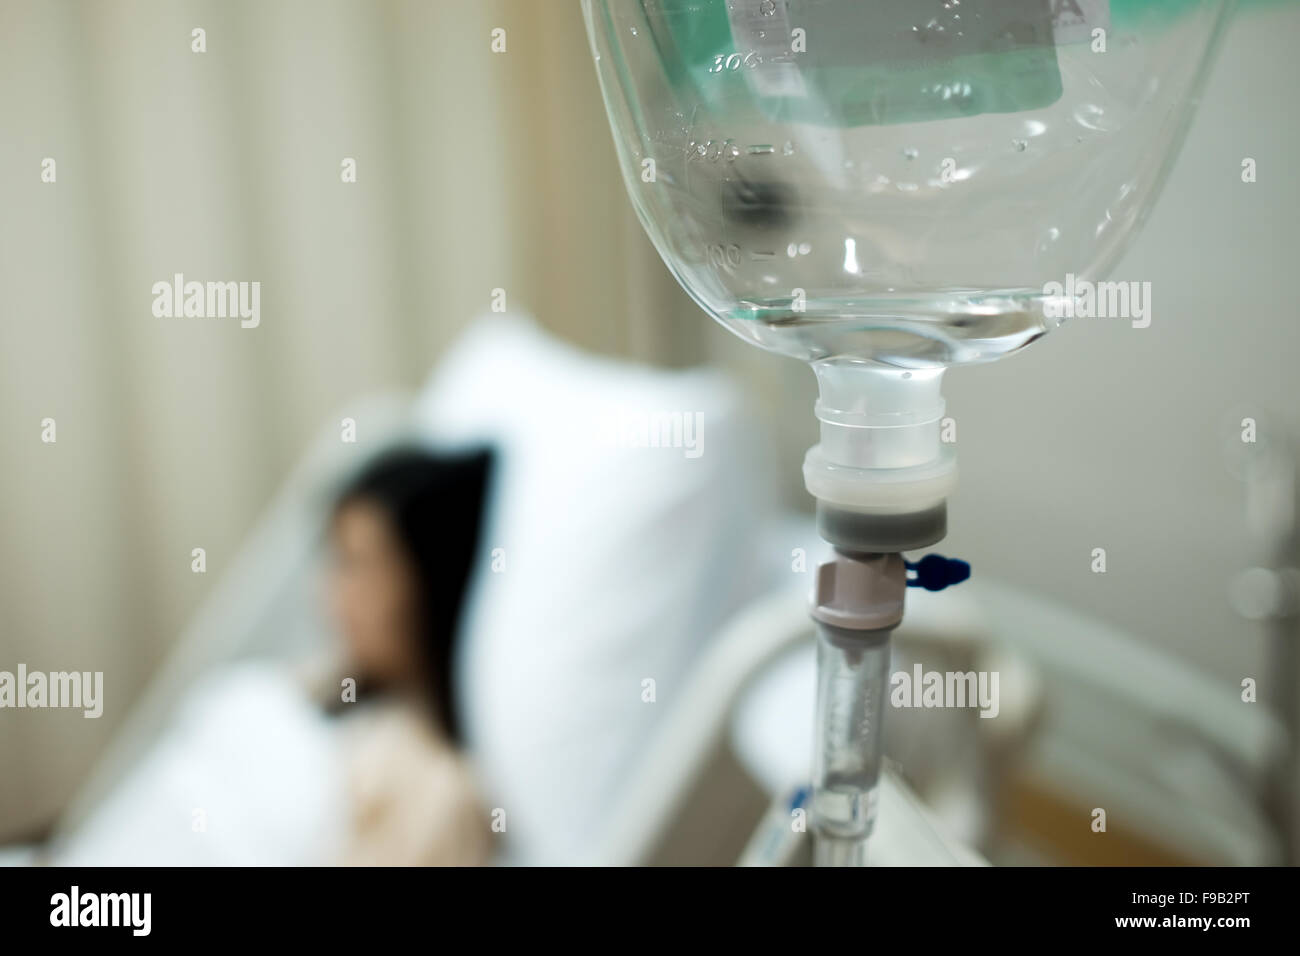 Saline IV drip bottle provided to the patient girl on the background Stock Photo